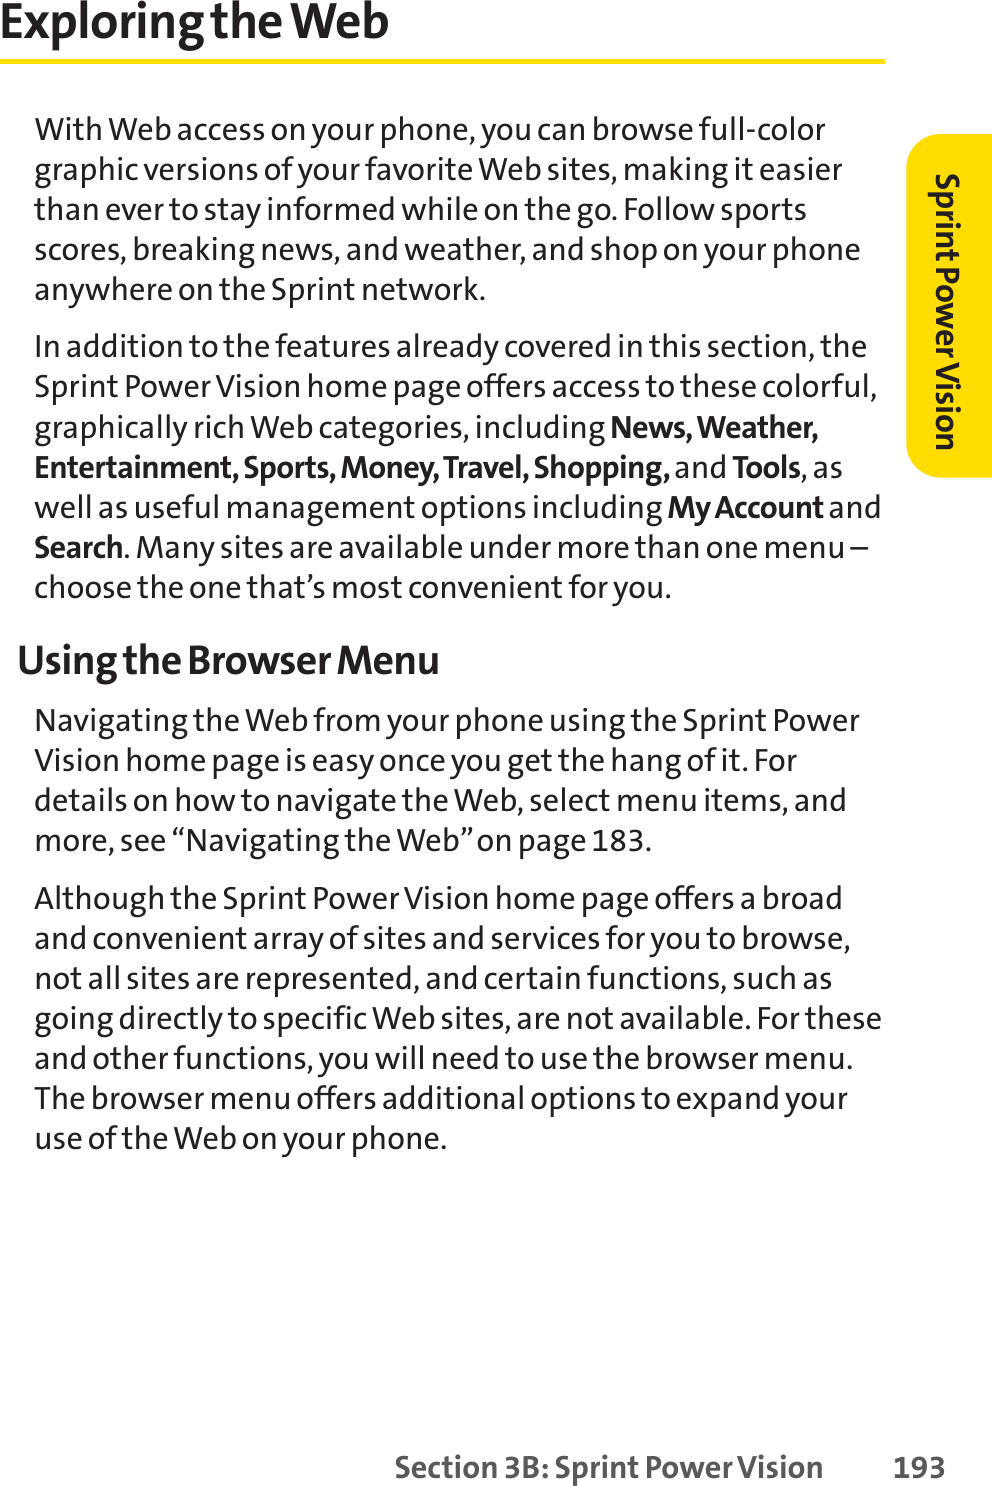 Section 3B: Sprint Power Vision 193Exploring the WebWith Web access on your phone, you can browse full-colorgraphic versions of your favorite Web sites, making it easierthan ever to stay informed while on the go. Follow sportsscores, breaking news, and weather, and shop on your phoneanywhere on the Sprint network.In addition to the features already covered in this section, theSprint Power Vision home page offers access to these colorful,graphically rich Web categories, including News, Weather,Entertainment, Sports, Money, Travel, Shopping, and Tools,aswell as useful management options including My Account andSearch. Many sites are available under more than one menu –choose the one that’s most convenient for you.Using the Browser MenuNavigating the Web from your phone using the Sprint PowerVision home page is easy once you get the hang of it. Fordetails on how to navigate the Web, select menu items, andmore, see “Navigating the Web”on page 183.Although the Sprint Power Vision home page offers a broadand convenient array of sites and services for you to browse,not all sites are represented, and certain functions, such asgoing directly to specific Web sites, are not available. For theseand other functions, you will need to use the browser menu.The browser menu offers additional options to expand youruse of the Web on your phone.Sprint PowerVision